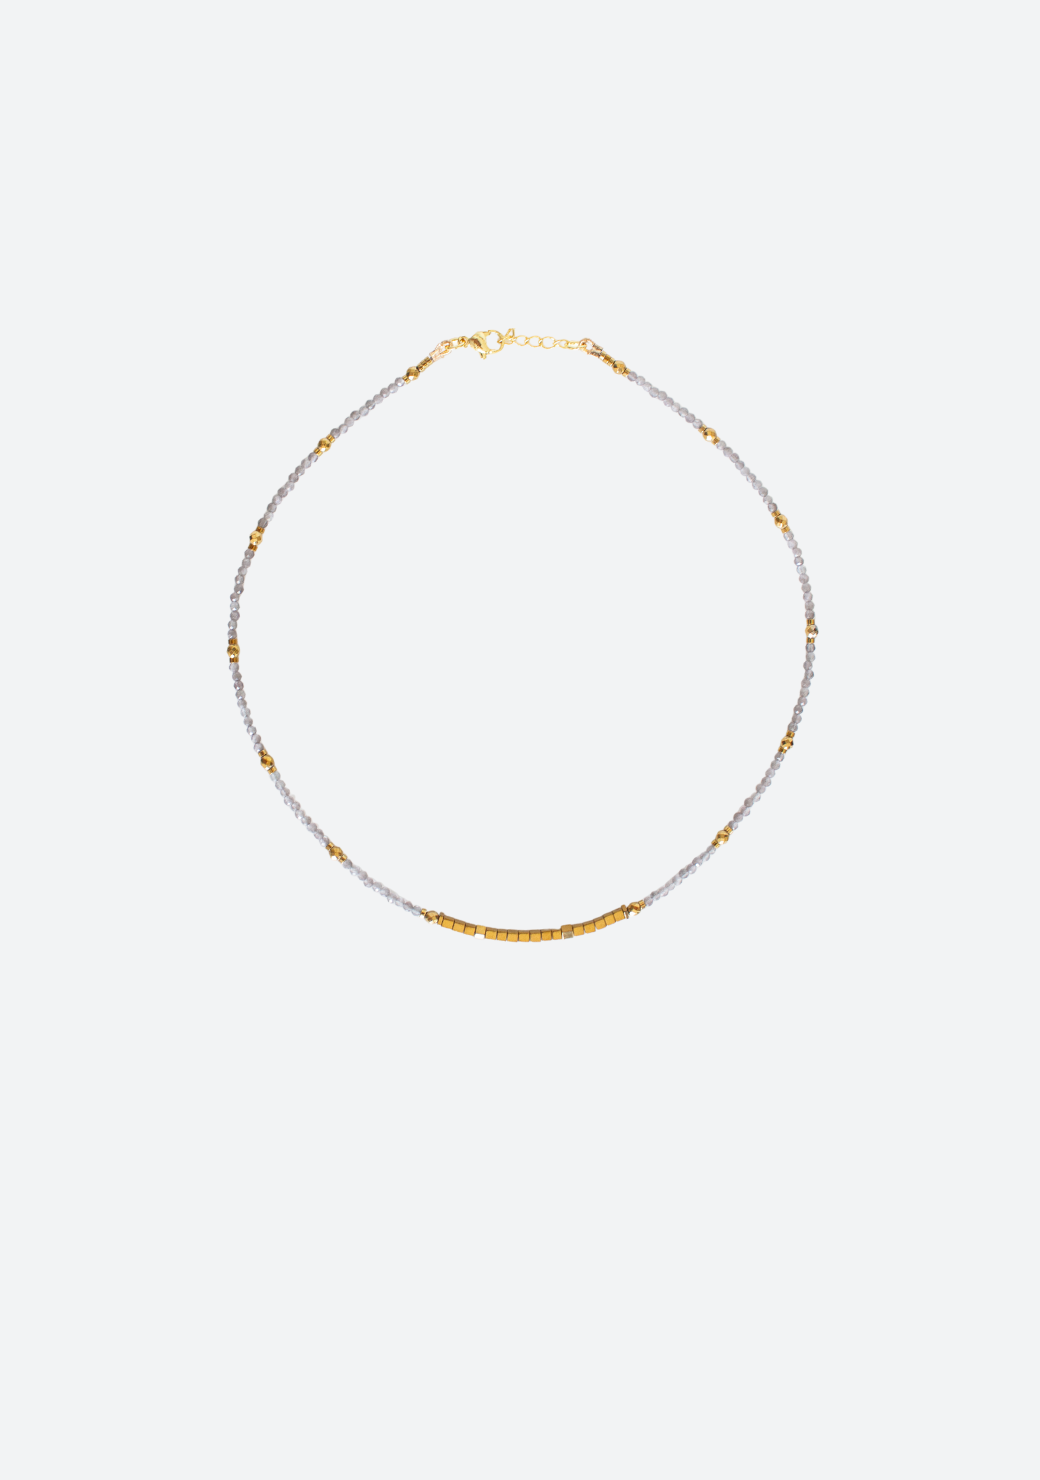 Rondelle Necklace in Grey and Gold